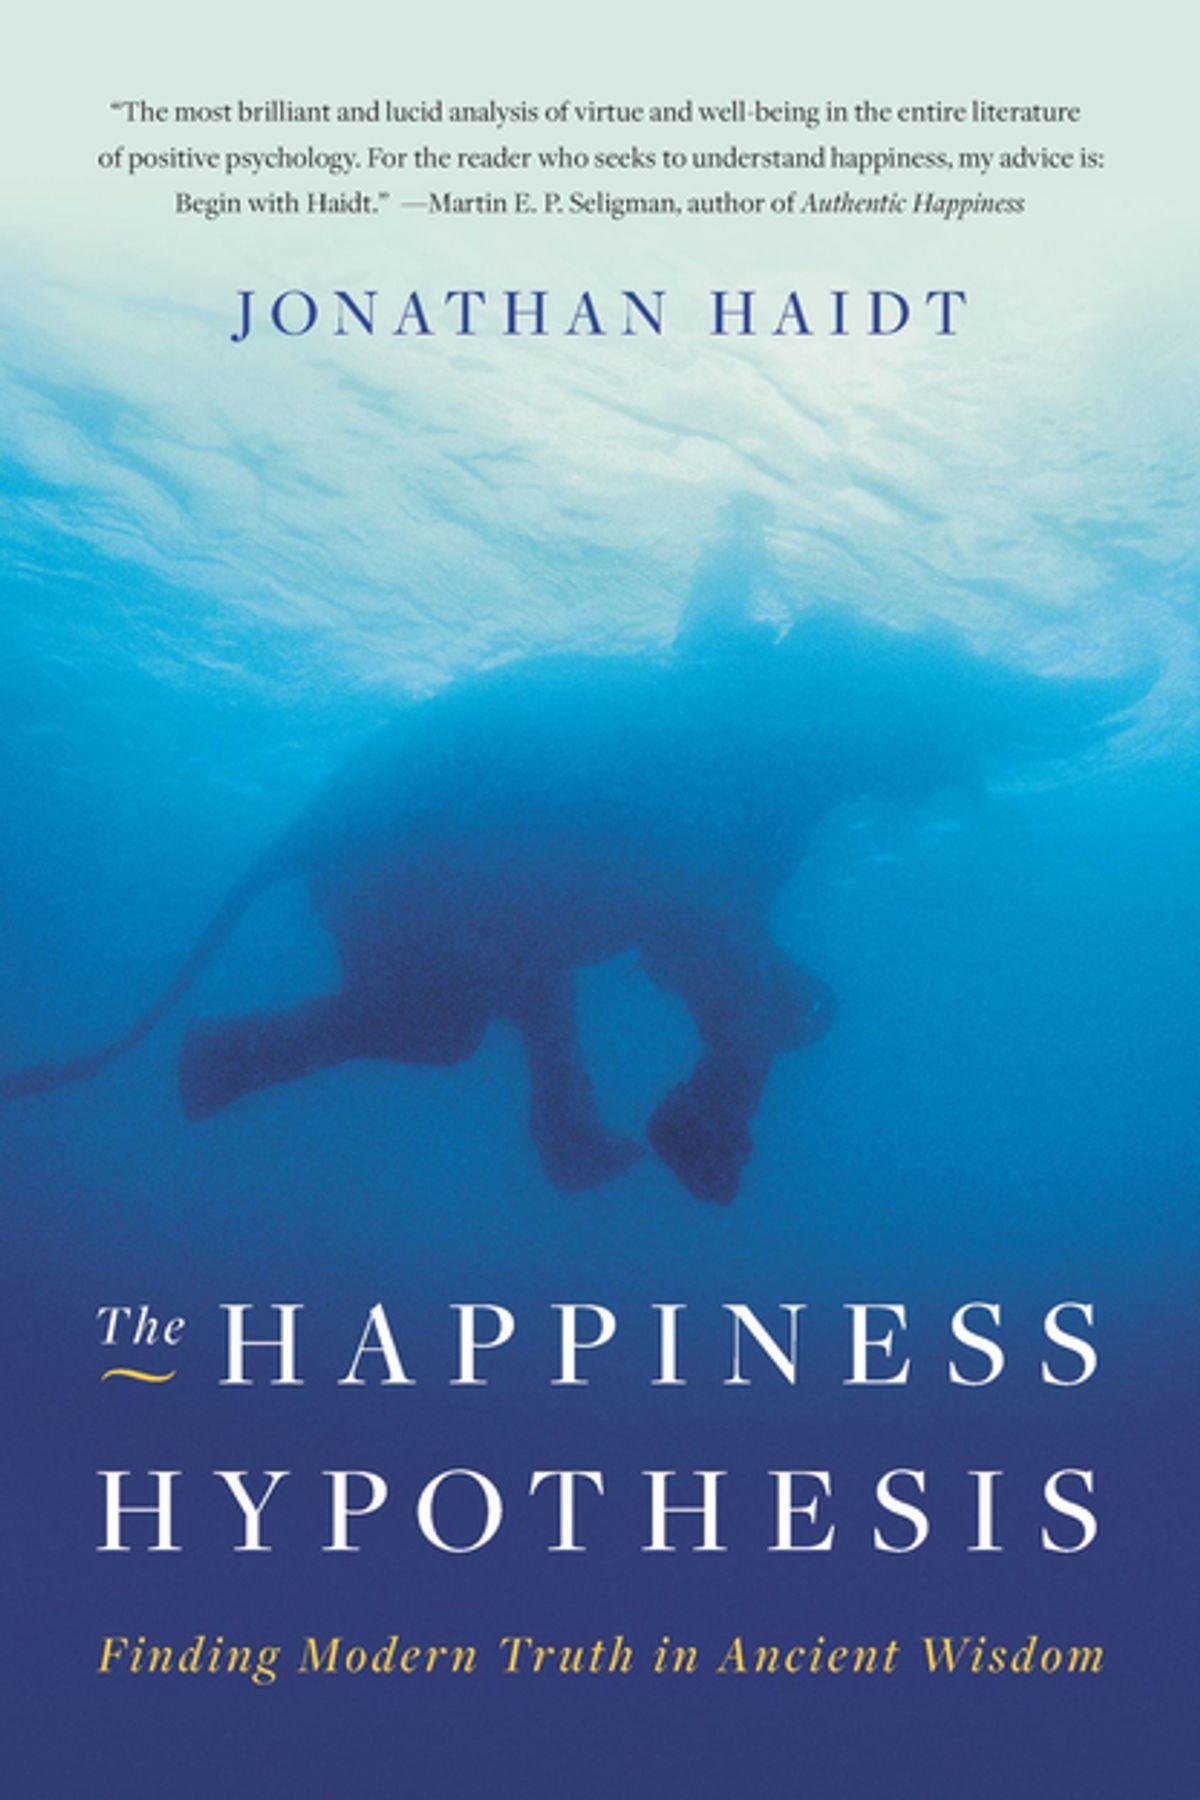 Book Cover of The Happiness Hypothesis